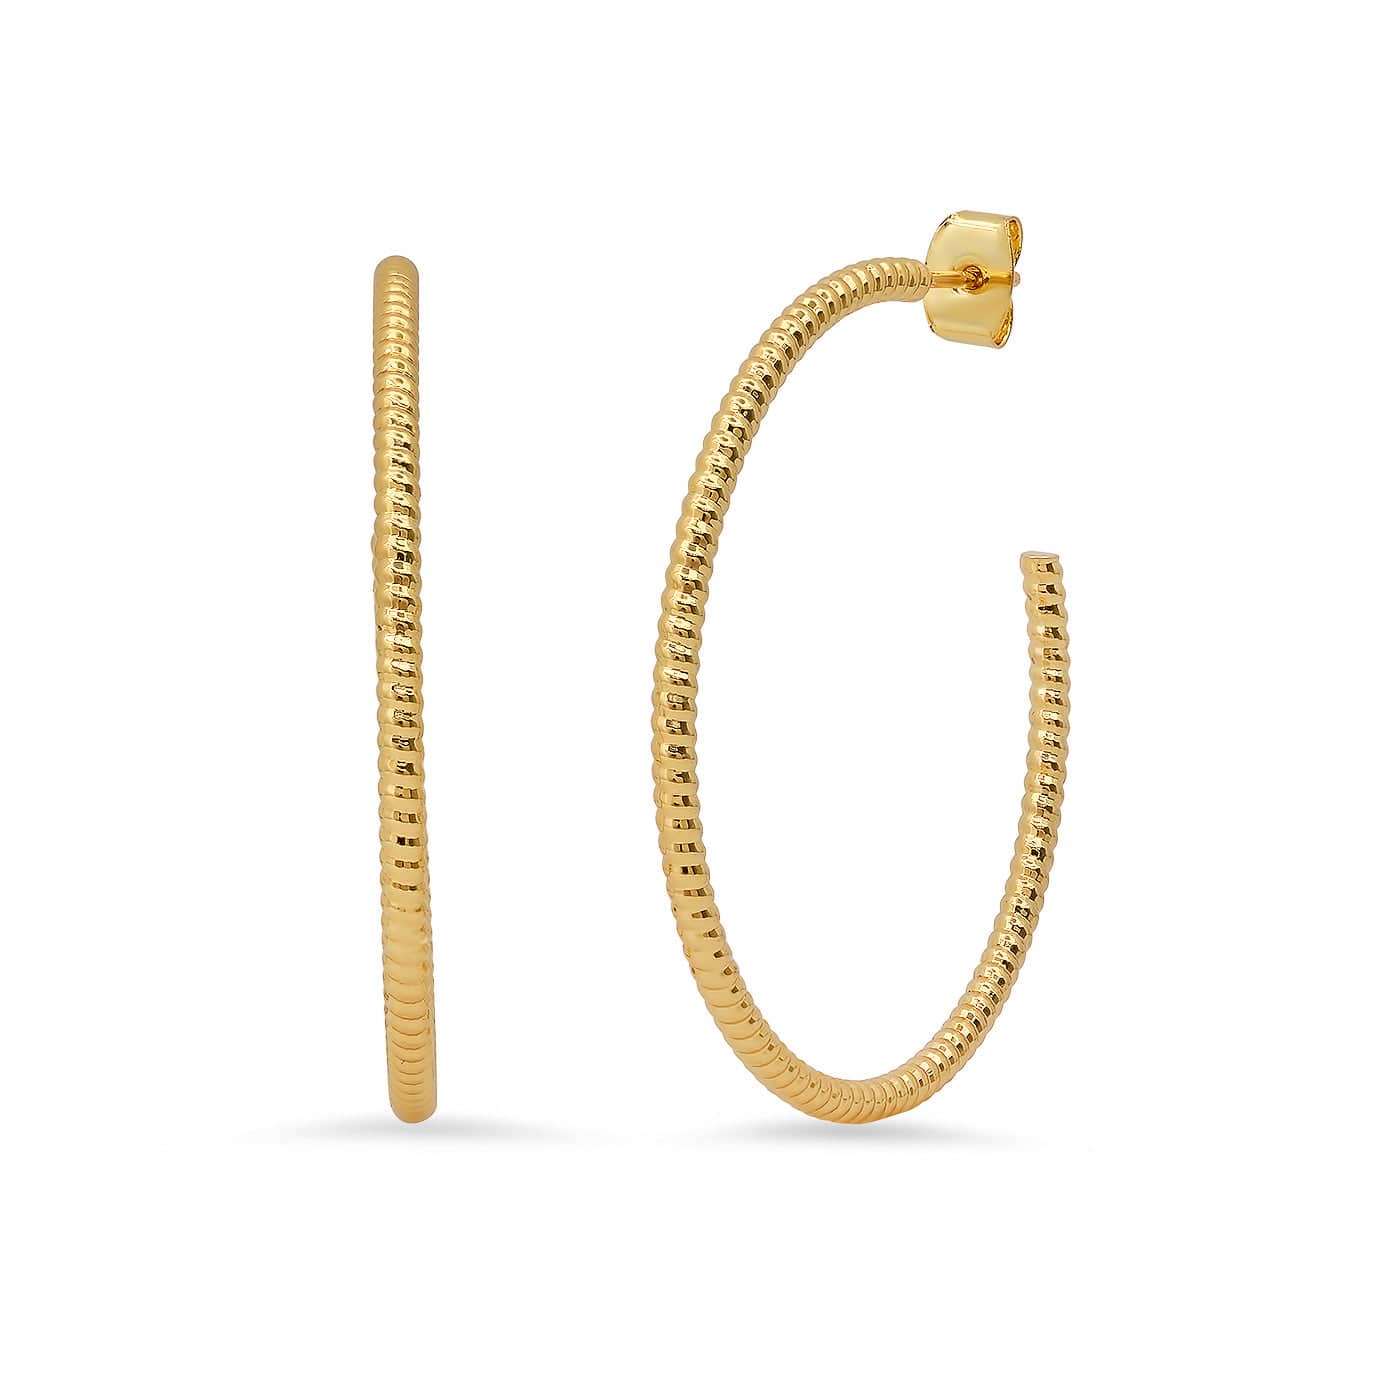 TAI JEWELRY Earrings Twisted Large Gold Hoops